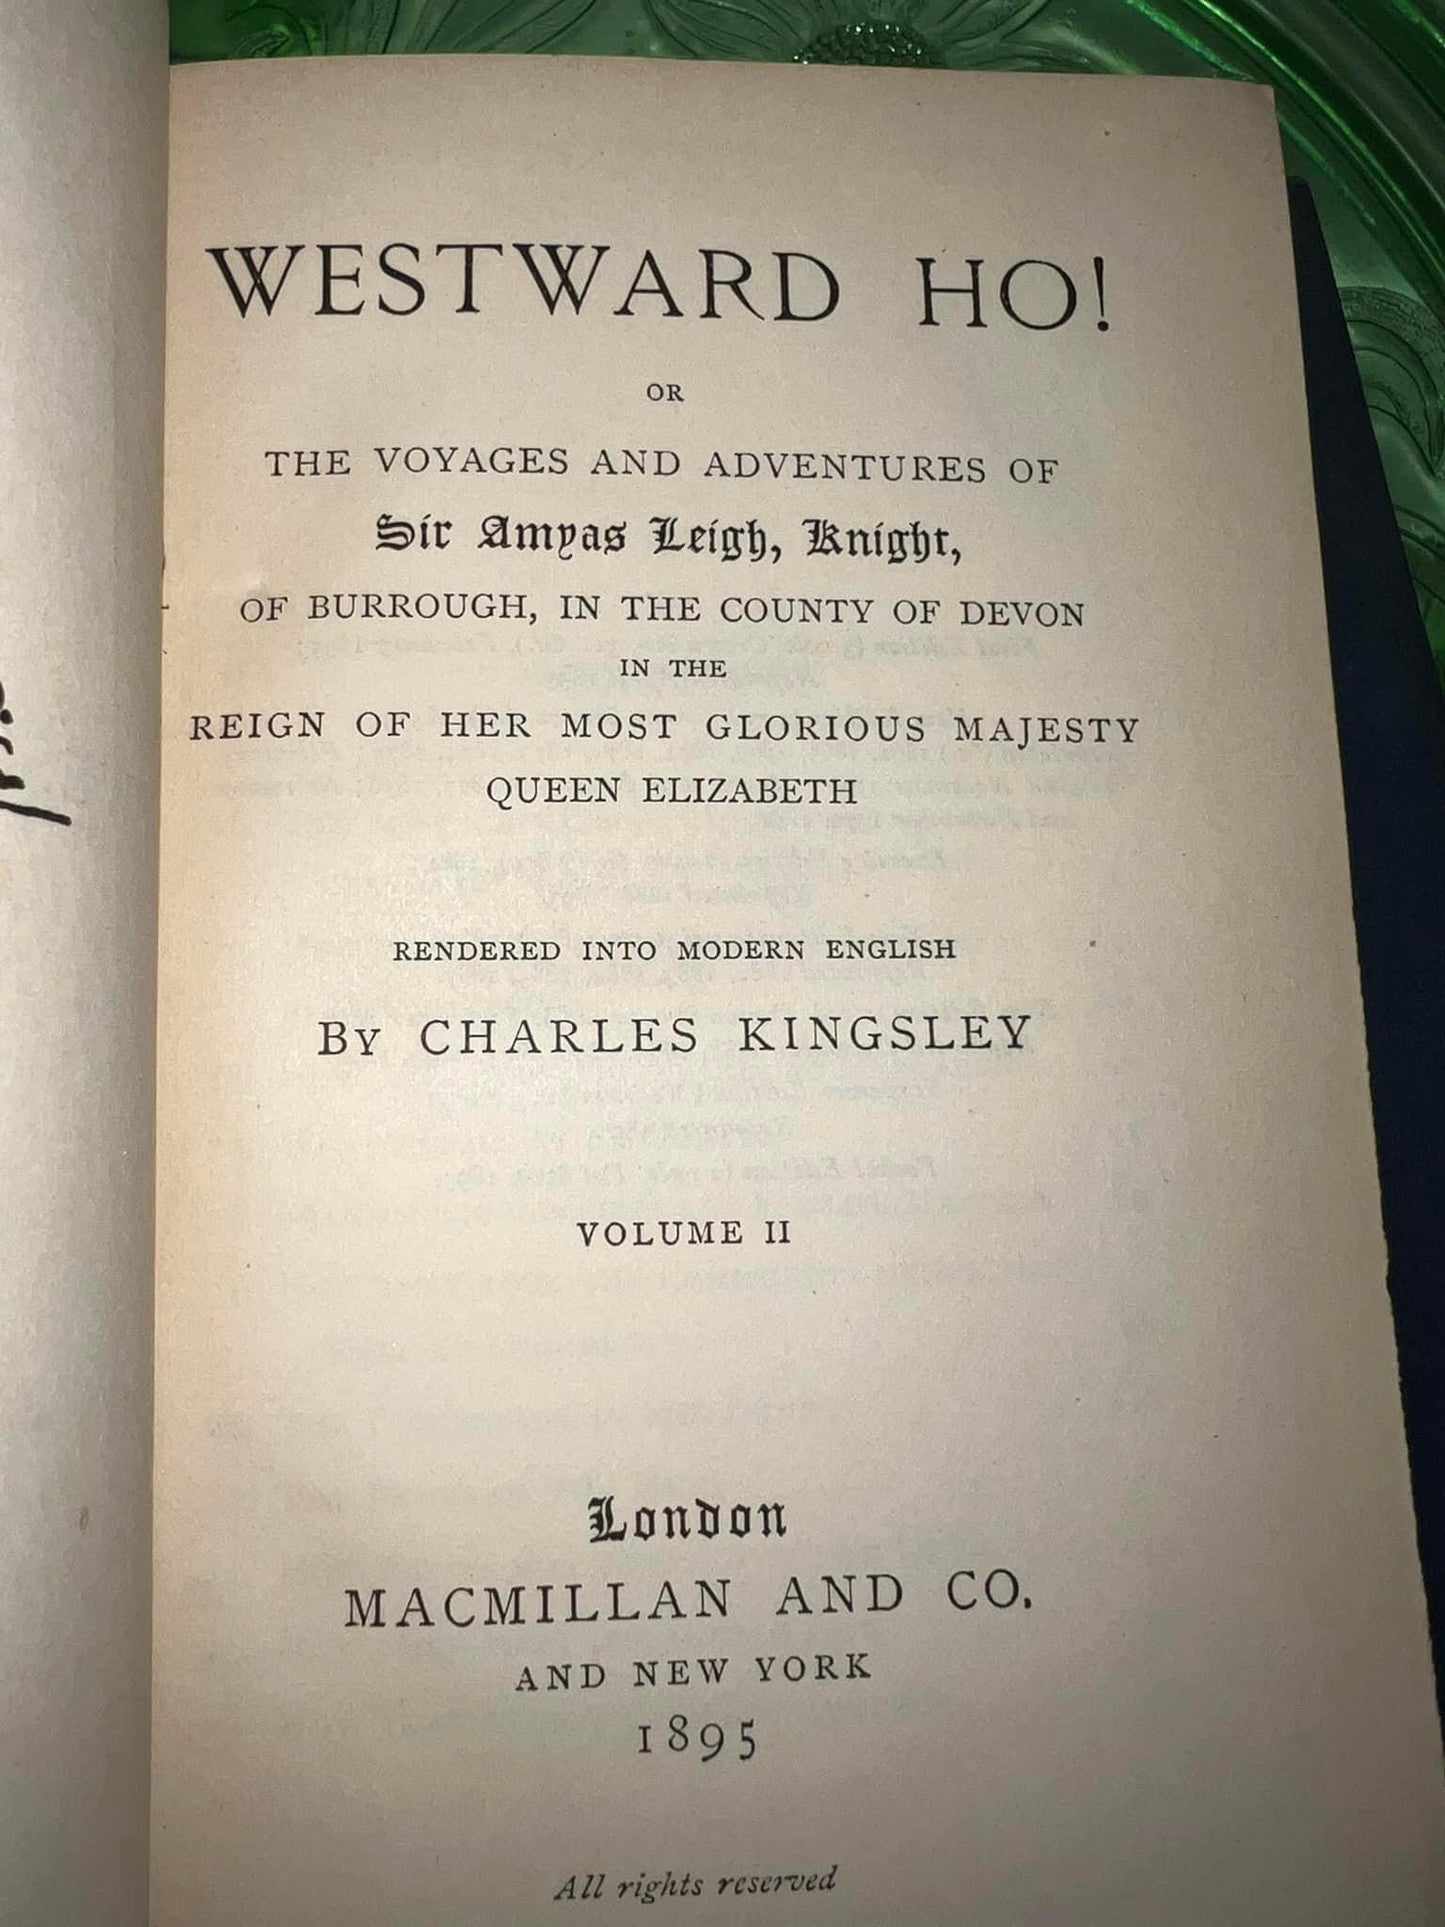 Westward ho C 1895 Voyages and adventures of sir amyas leigh knight Of borough in the county of Devon in the reign of queen Elizabeth